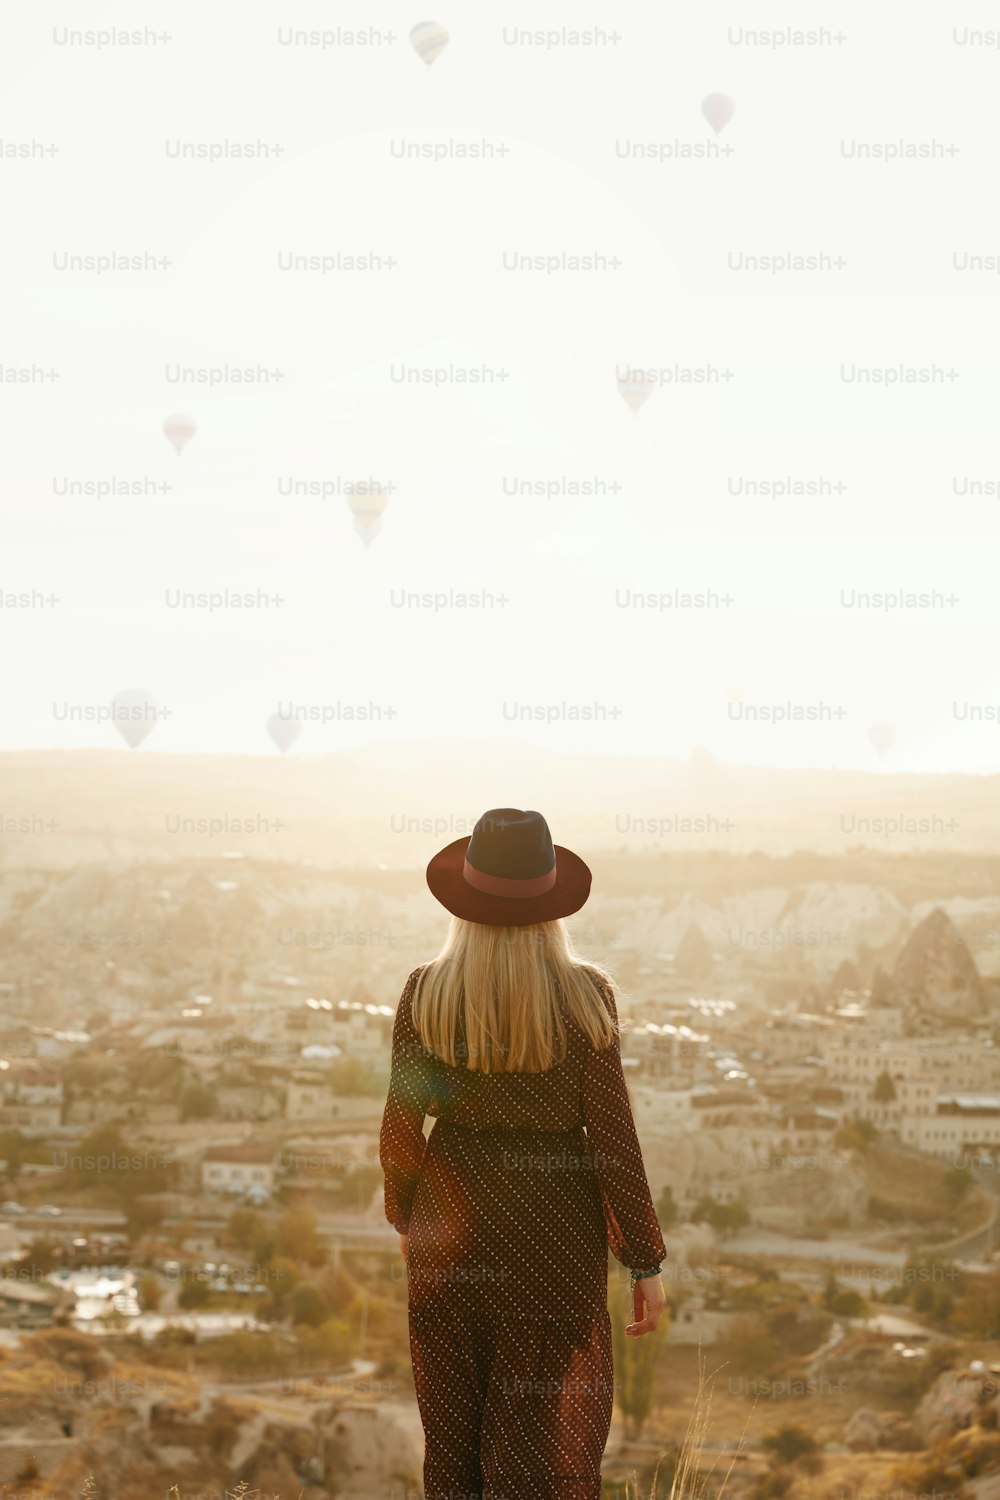 Travel. Beautiful Woman In Hat On Hill With Flying Hot Air Balloons In Sky. Female Traveling To Cappadocia. High Resolution